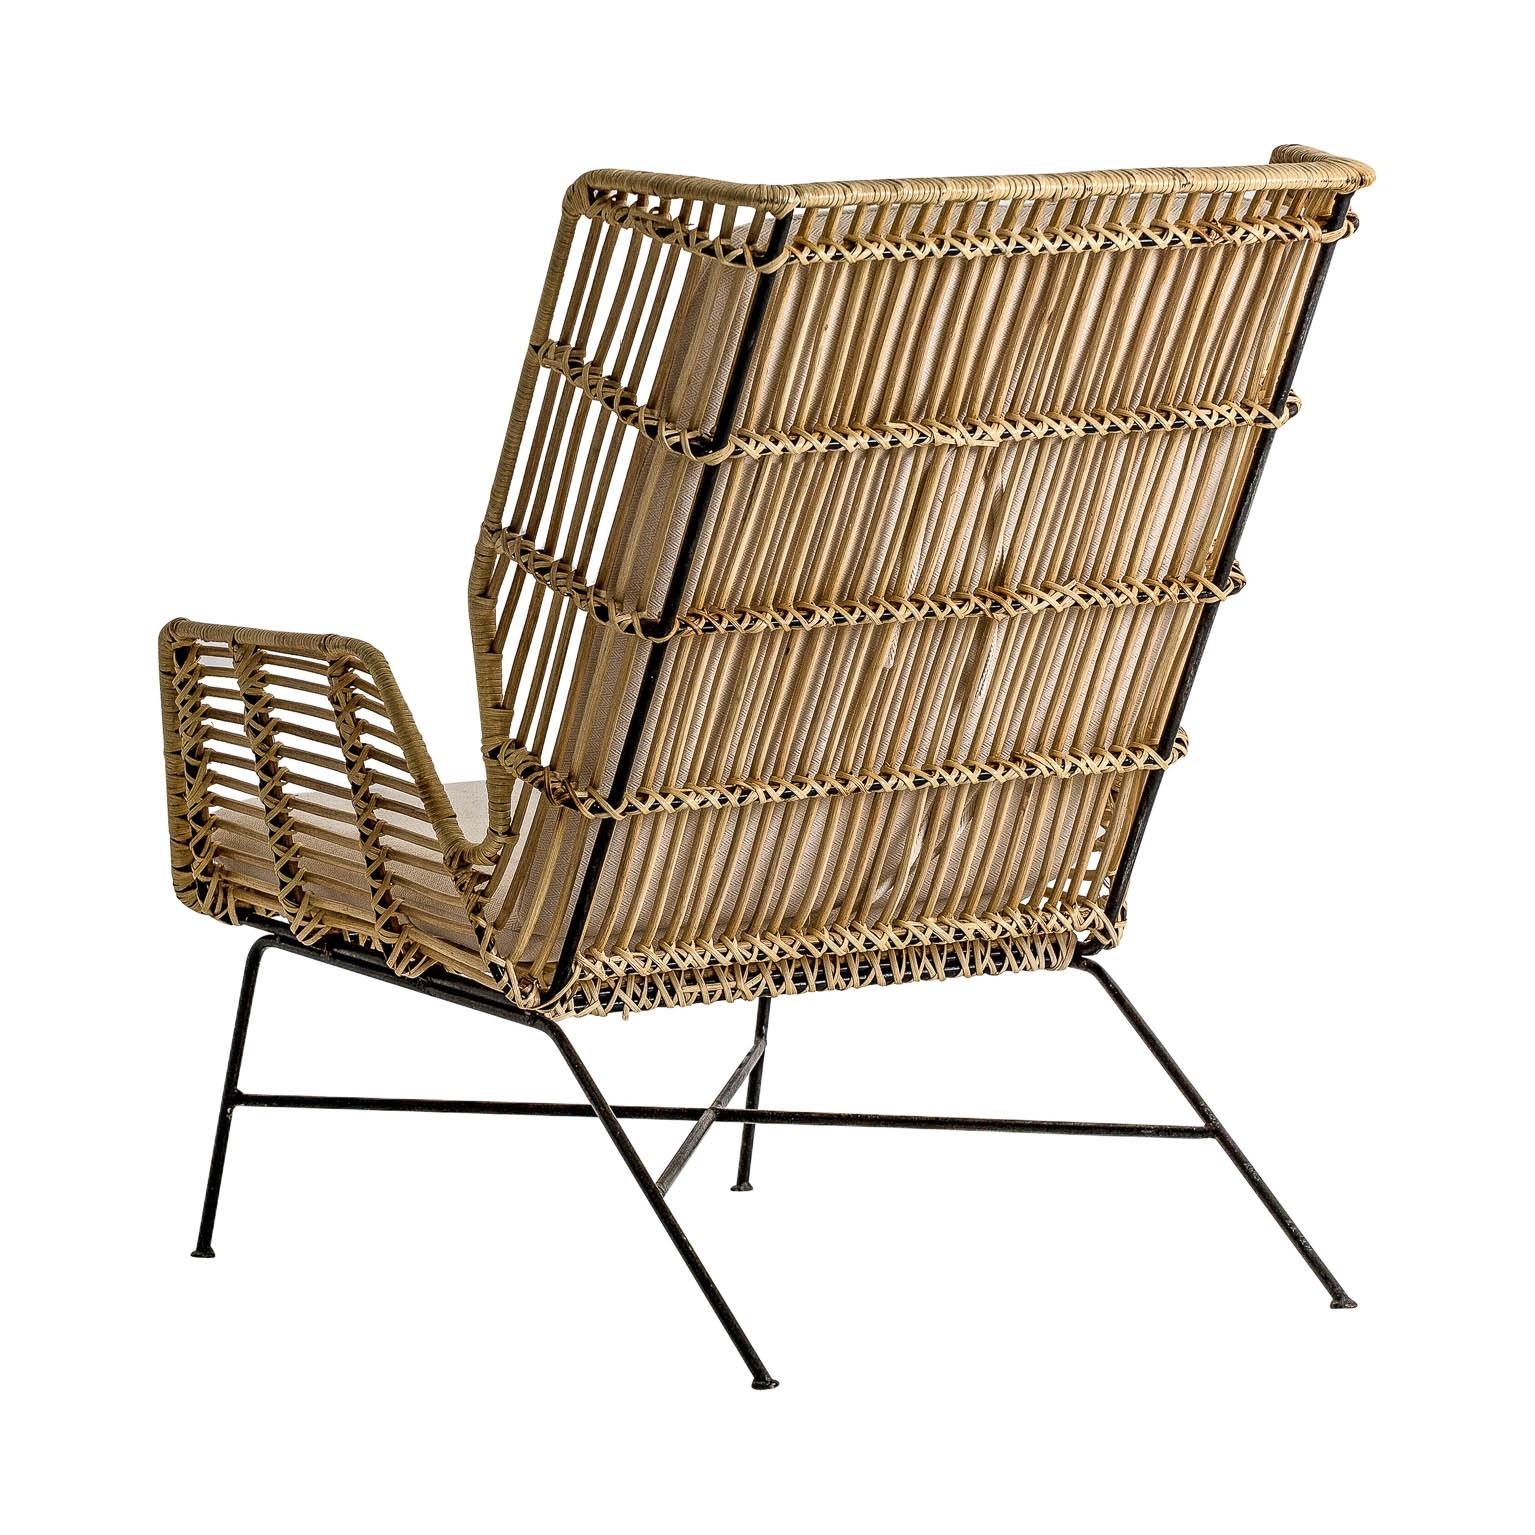 Midcentury Style Rattan and Black Metal Armchair A must-have for any lover of vintage style and natural fiber.